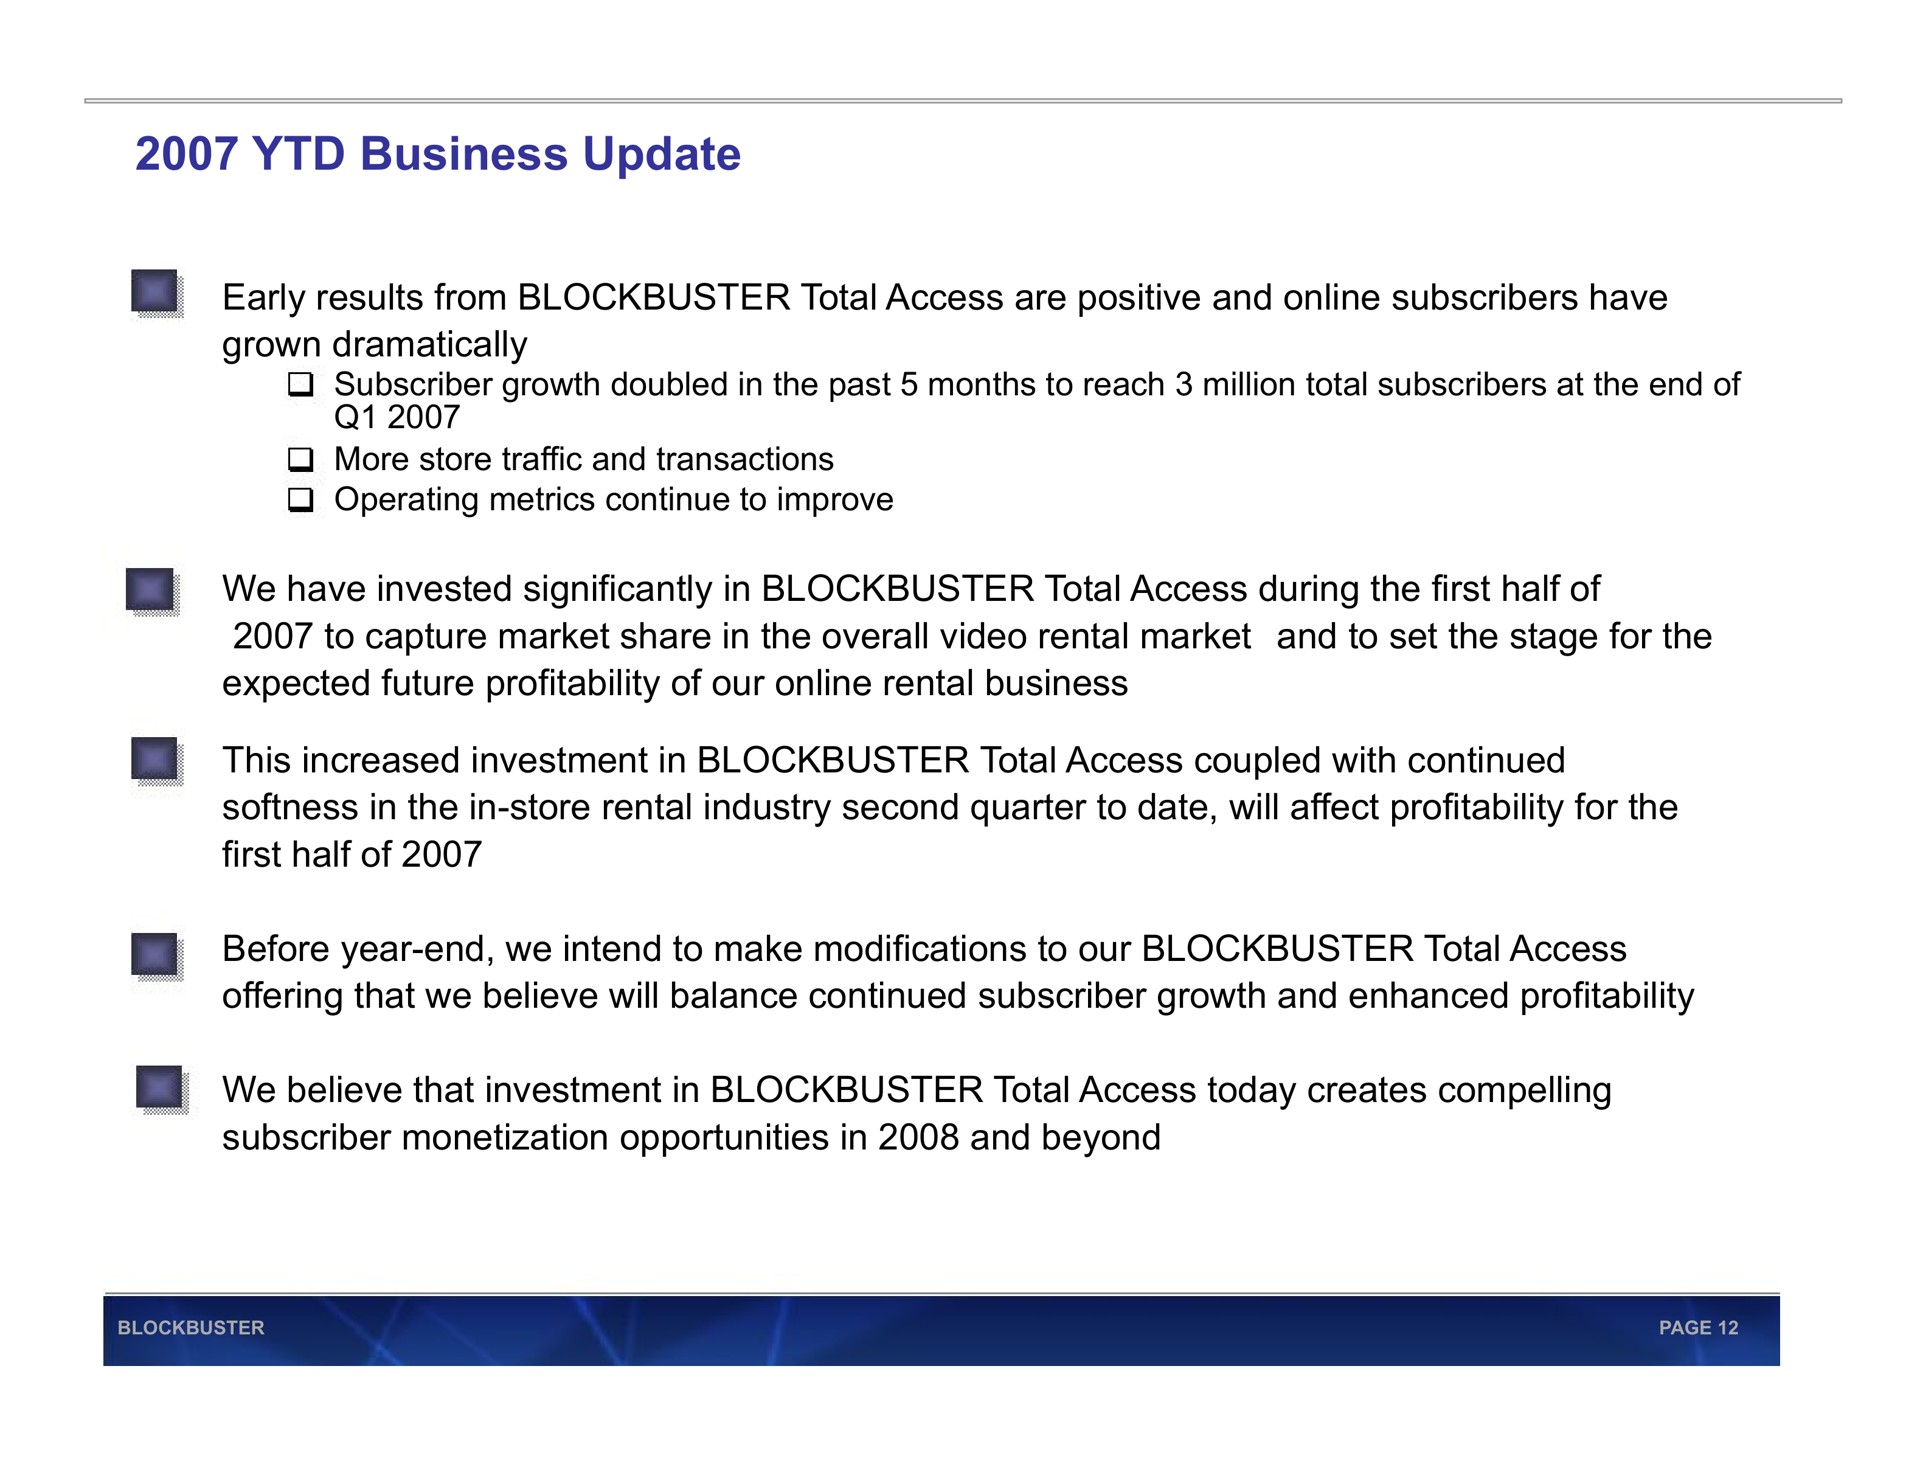 business update early results from blockbuster total access are positive and subscribers have grown dramatically we have invested significantly in blockbuster total access during the first half of expected future profitability of our rental before year end we intend to make modifications to our blockbuster total access | Blockbuster Video